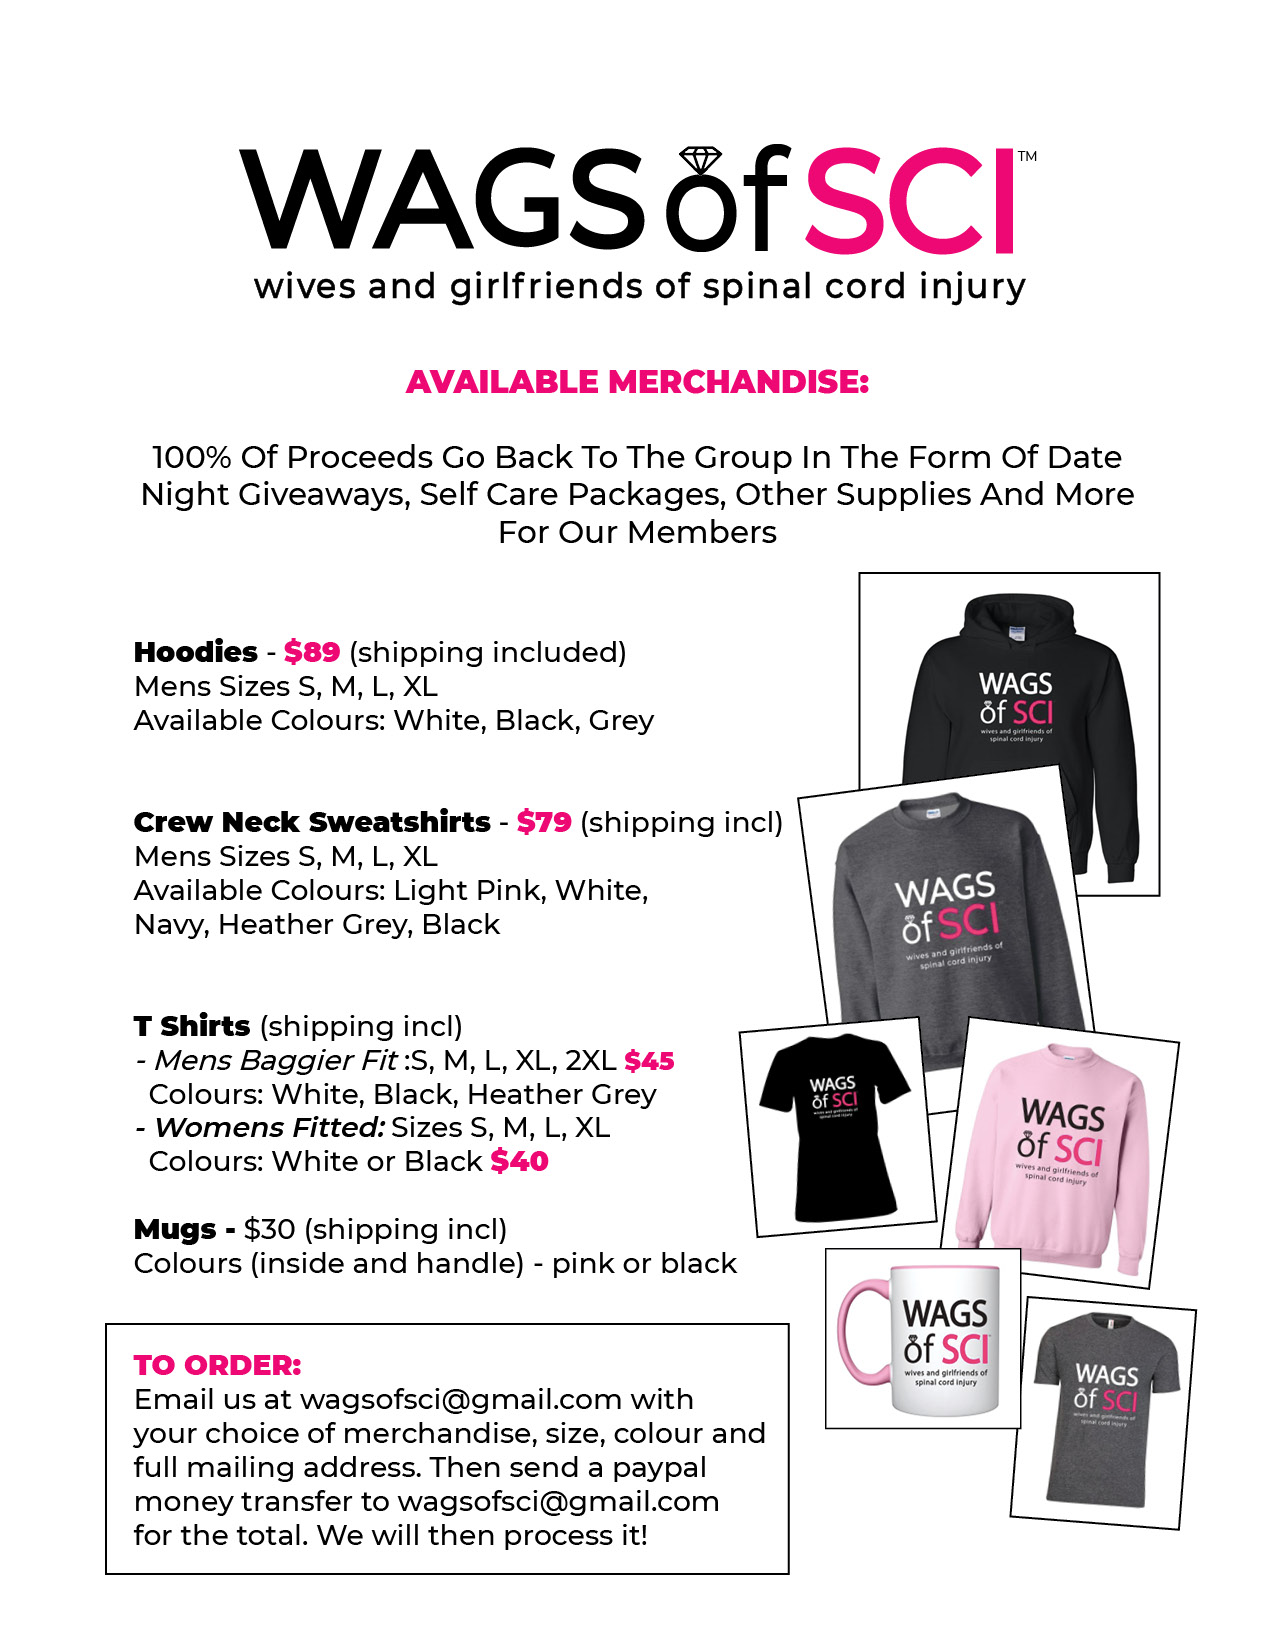 WAGS of SCI Current Merchandise